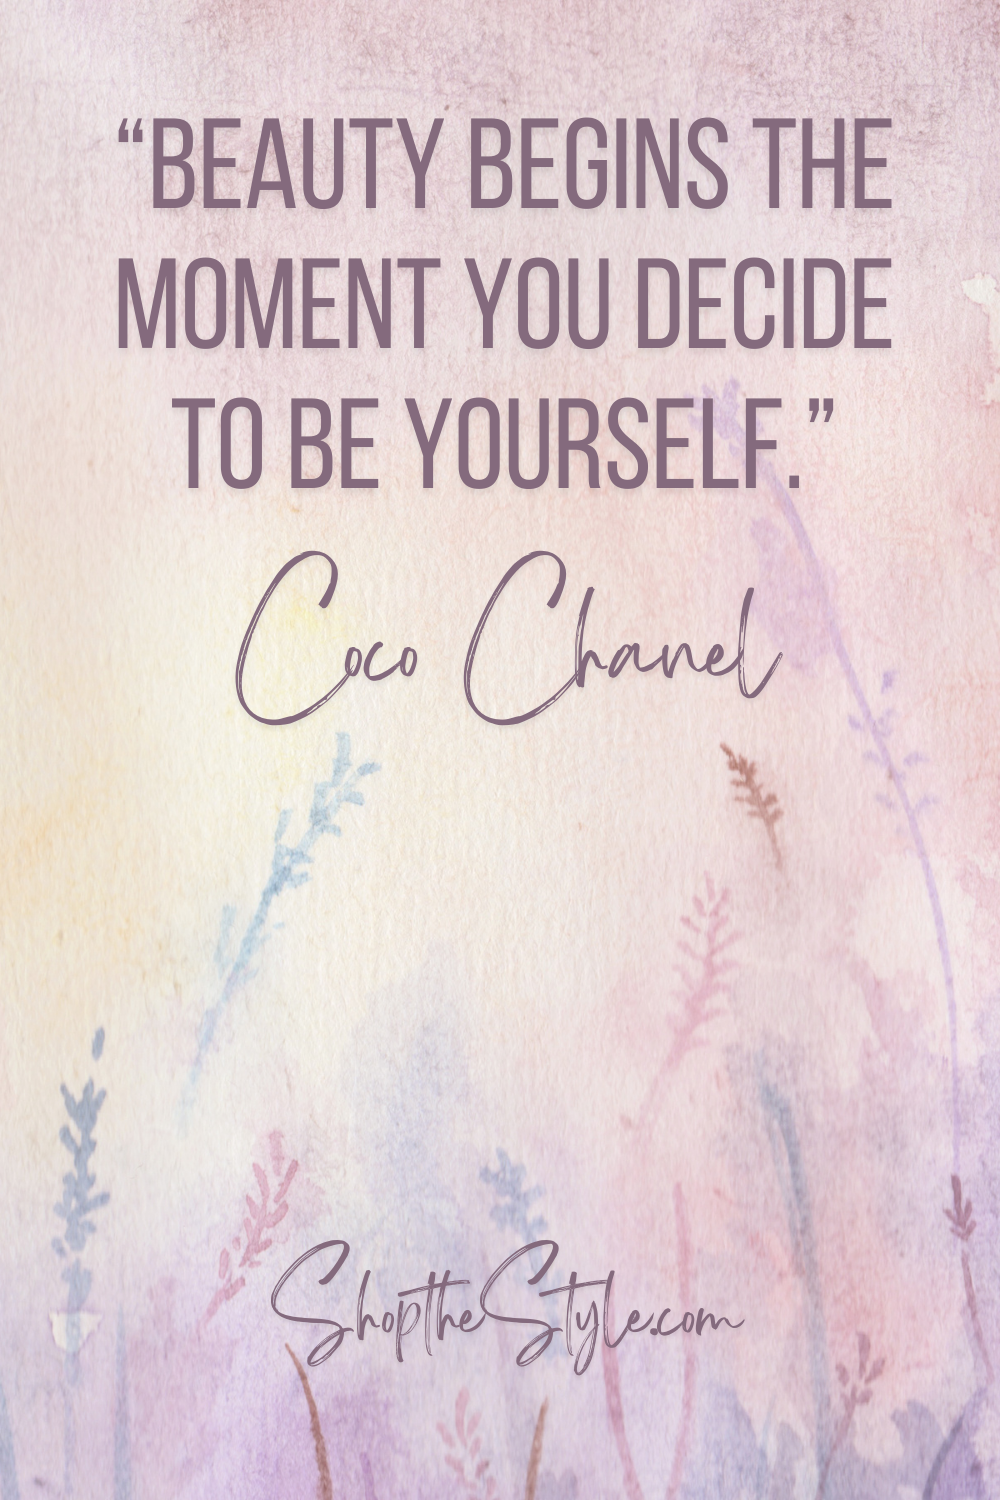 “Beauty begins the moment you decide to be yourself.” Coco Chanel quote